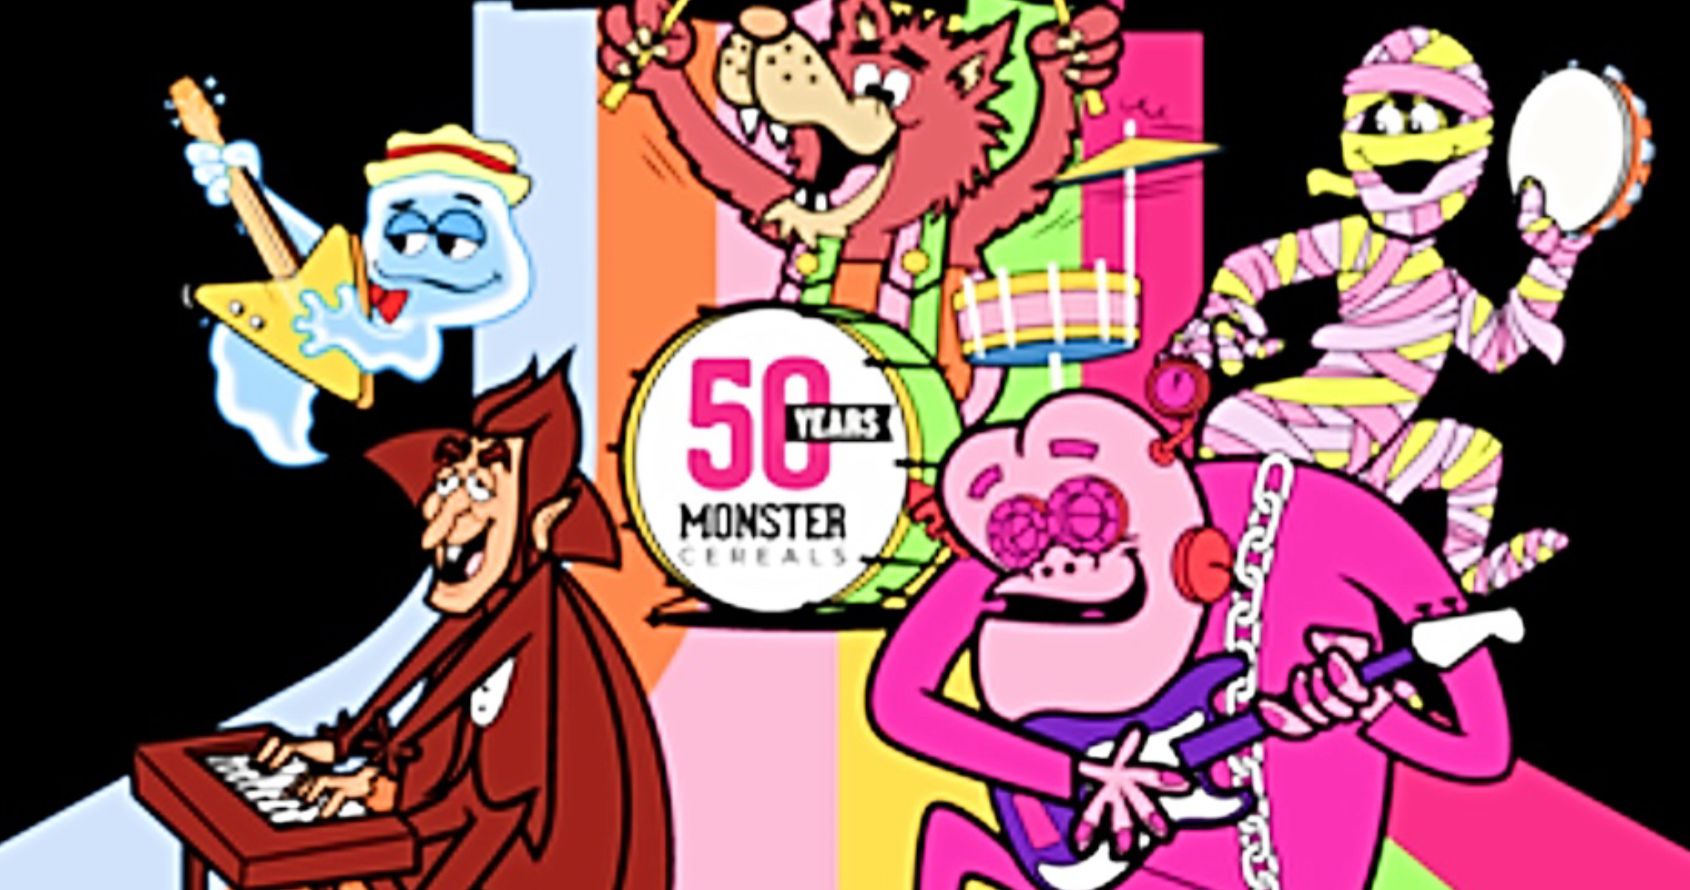 Cereal Monsters Unite for Monster Mash Breakfast This Halloween to Celebrate 50th Anniversary